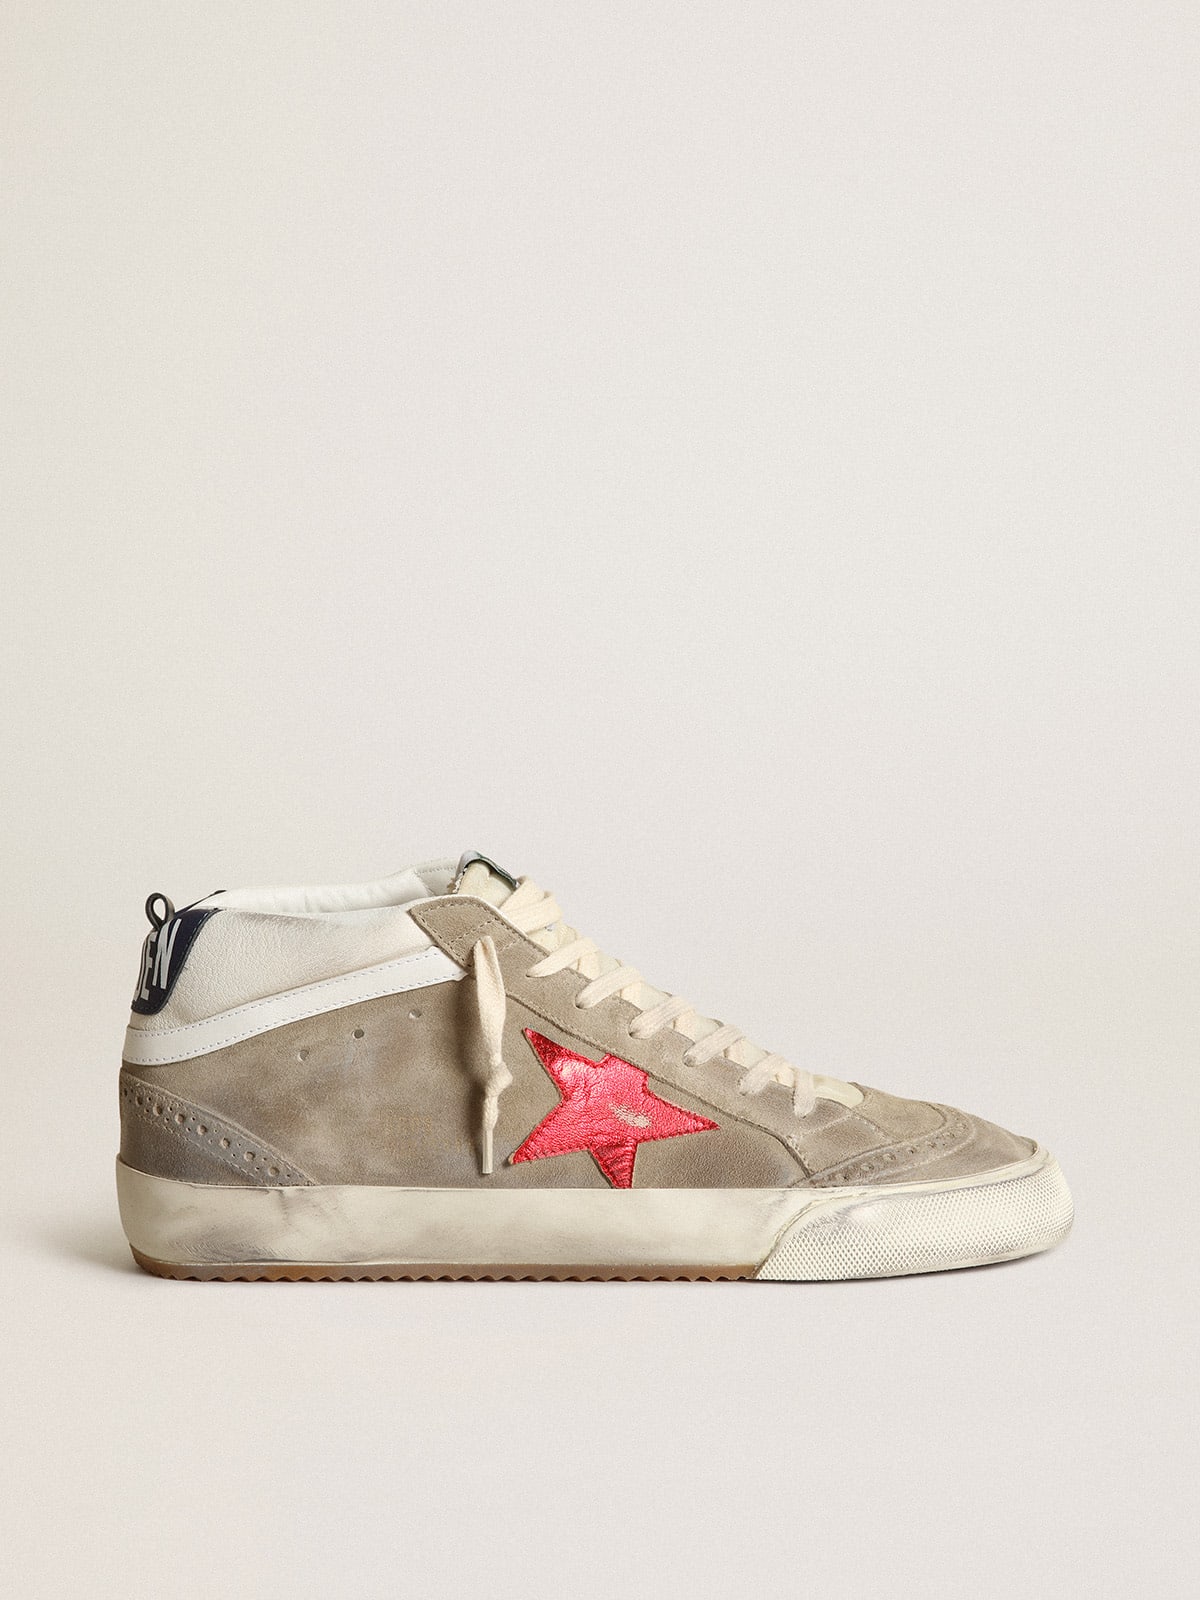 Mid Star sneakers in dove-gray suede with red metallic leather star and white leather flash